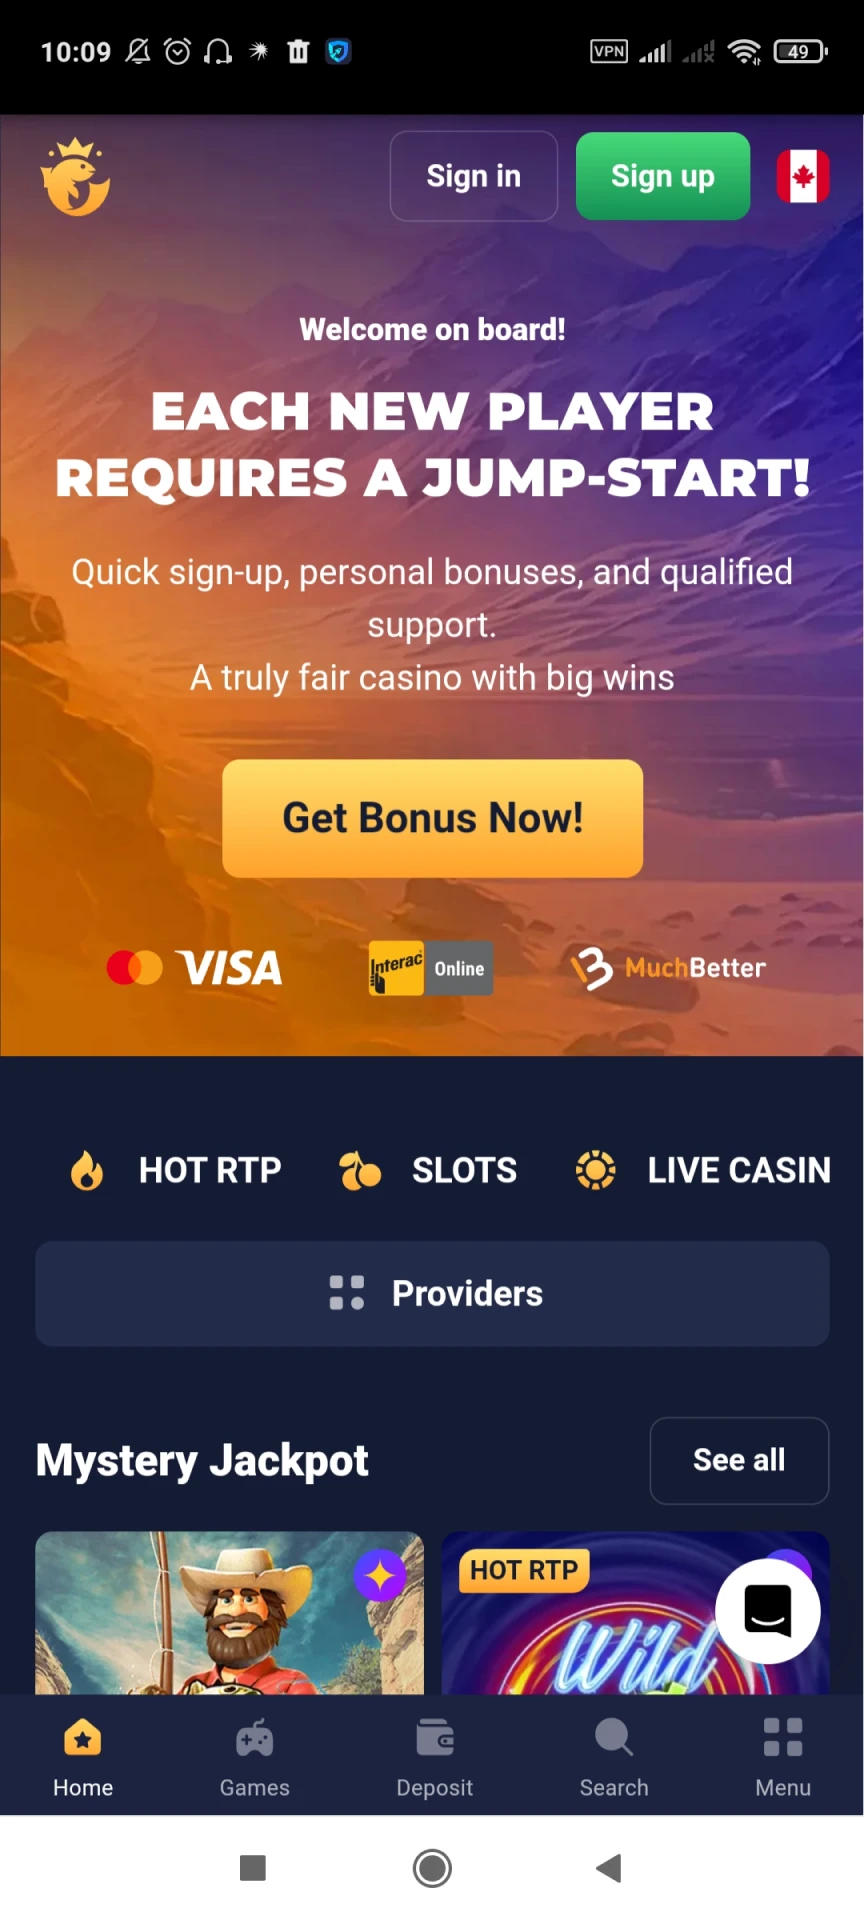 Visit the home page of the Joo Casino app.